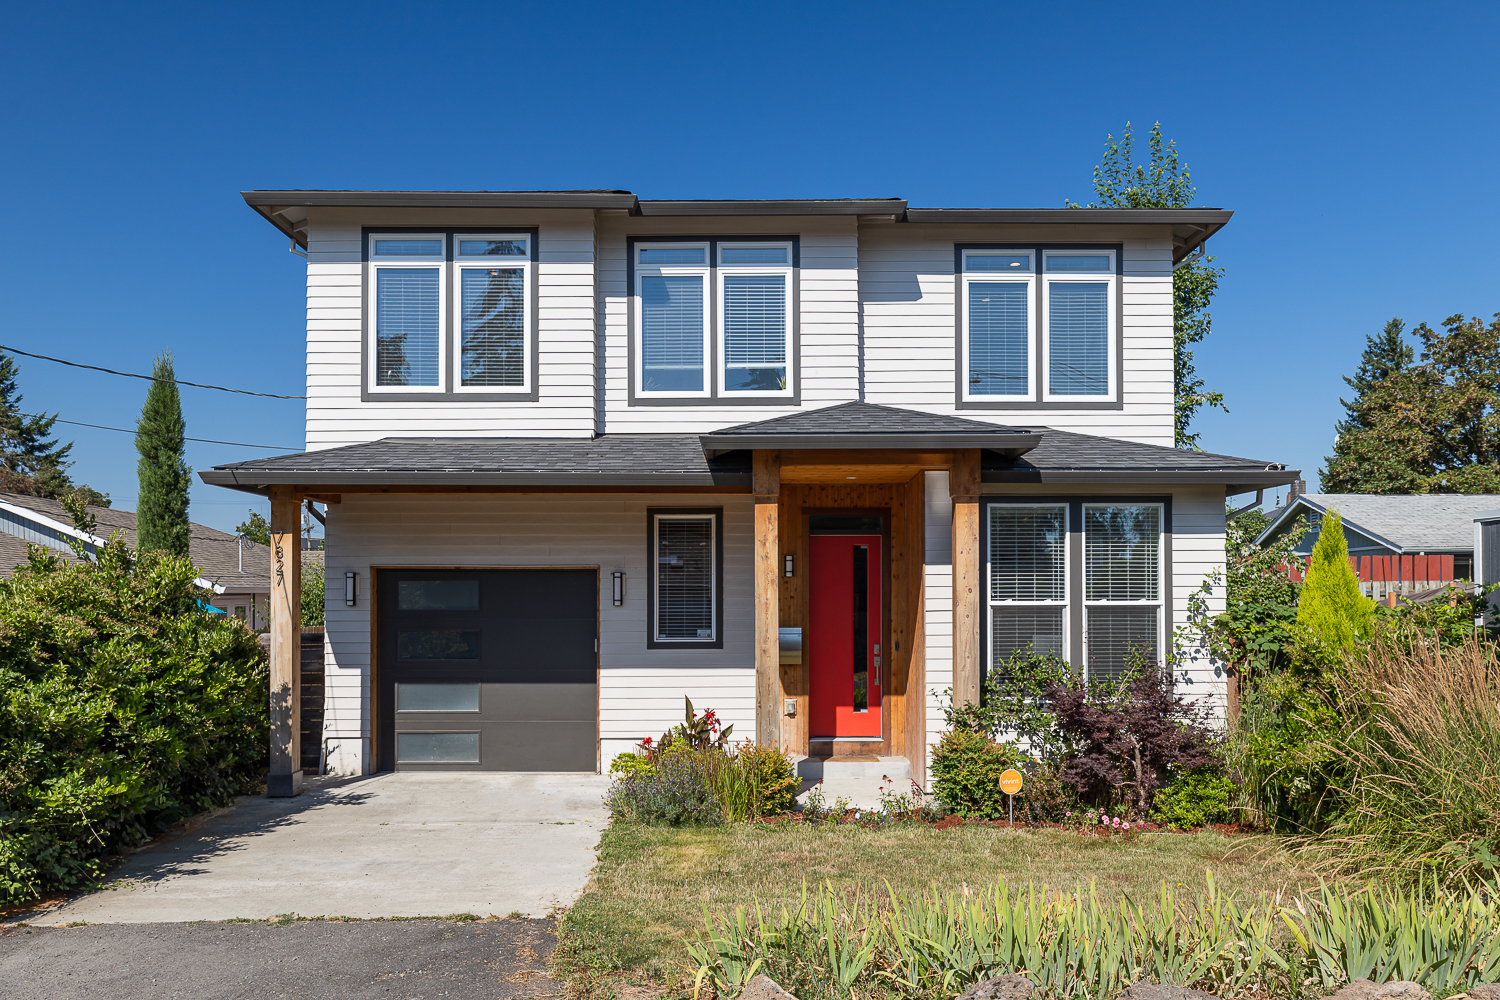 Now Available! 7827 SE 54th Ave., Portland 97206 Offered for $699,900